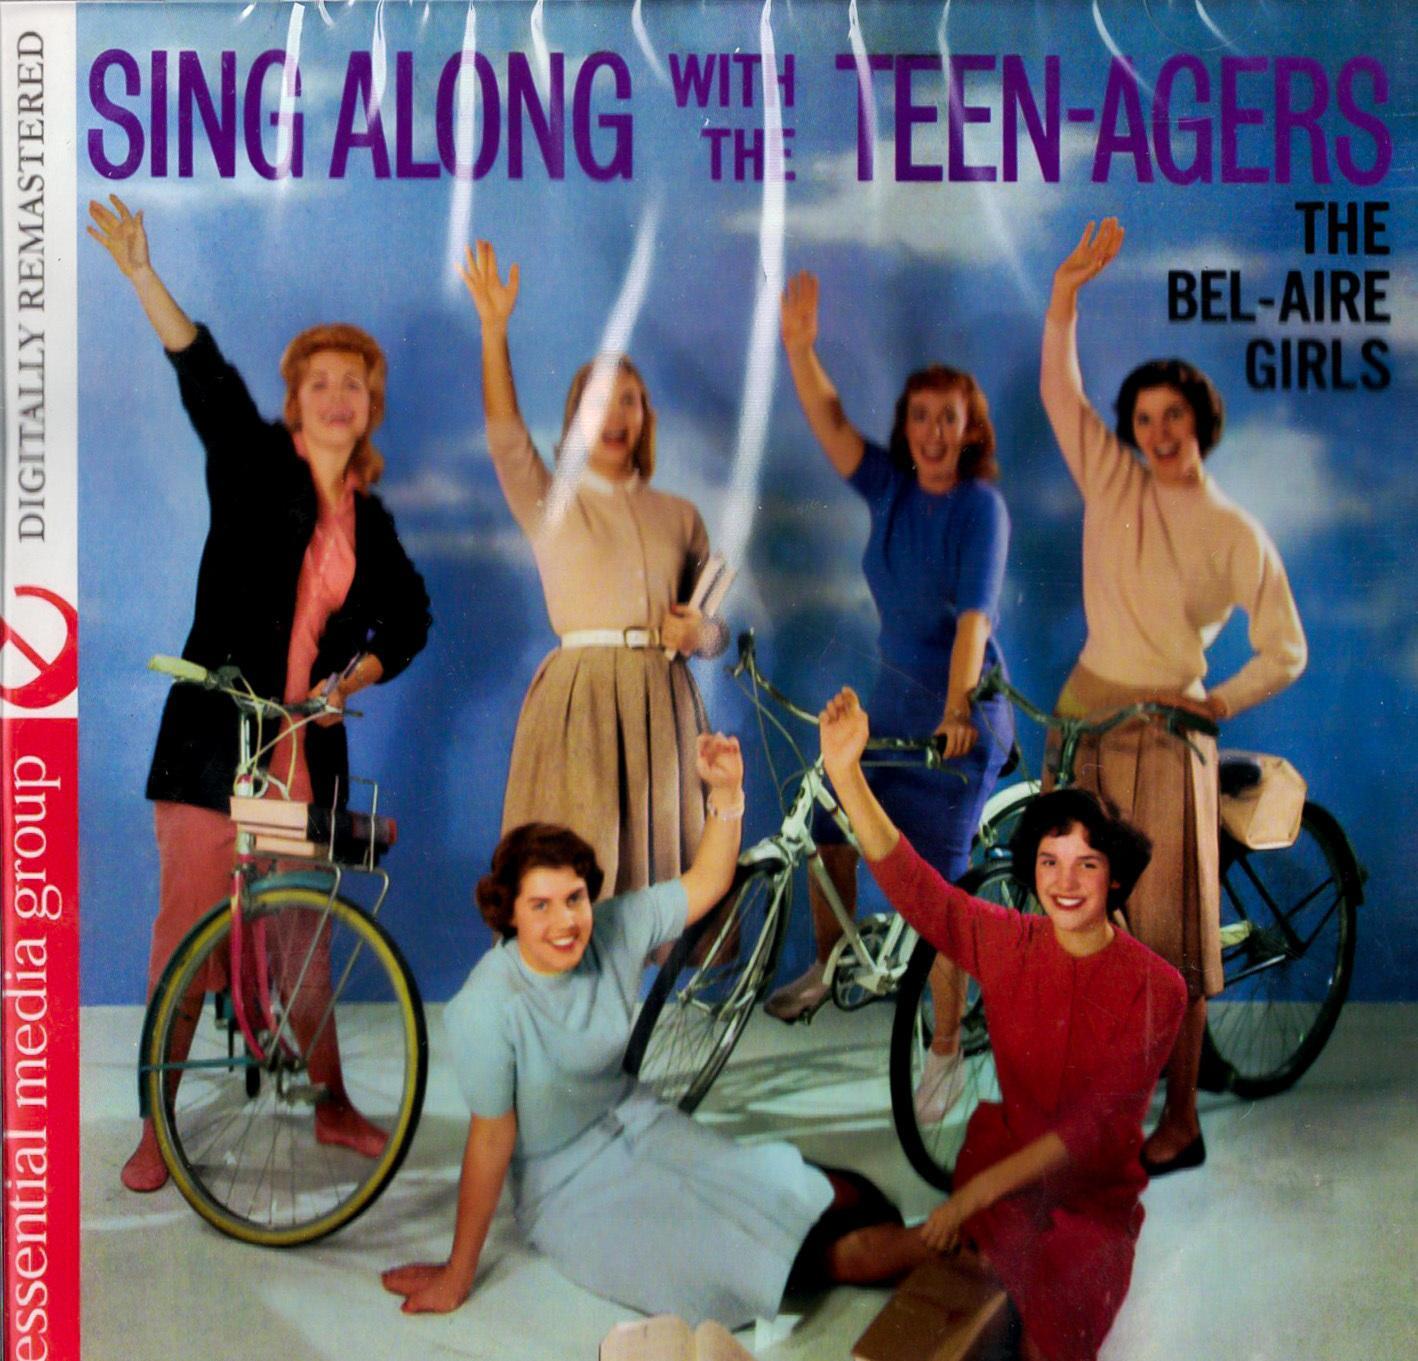 Sing Along With The Teenagers -Belaire Girls CD